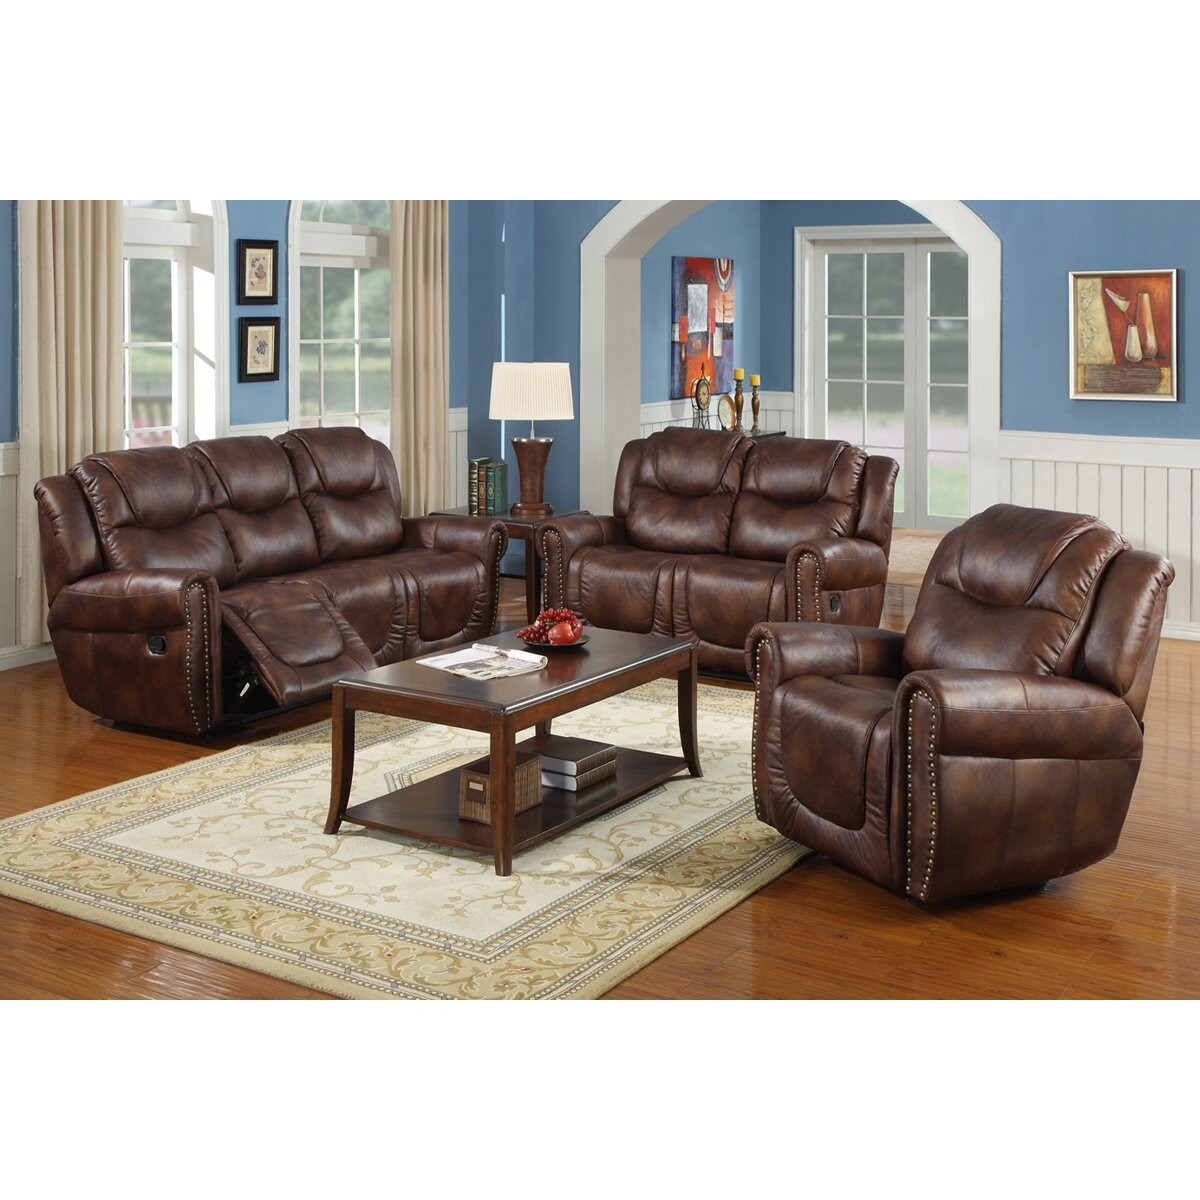 3 Piece Living Room Tables
 Beverly Fine Furniture Toledo 3 Piece Bonded Leather